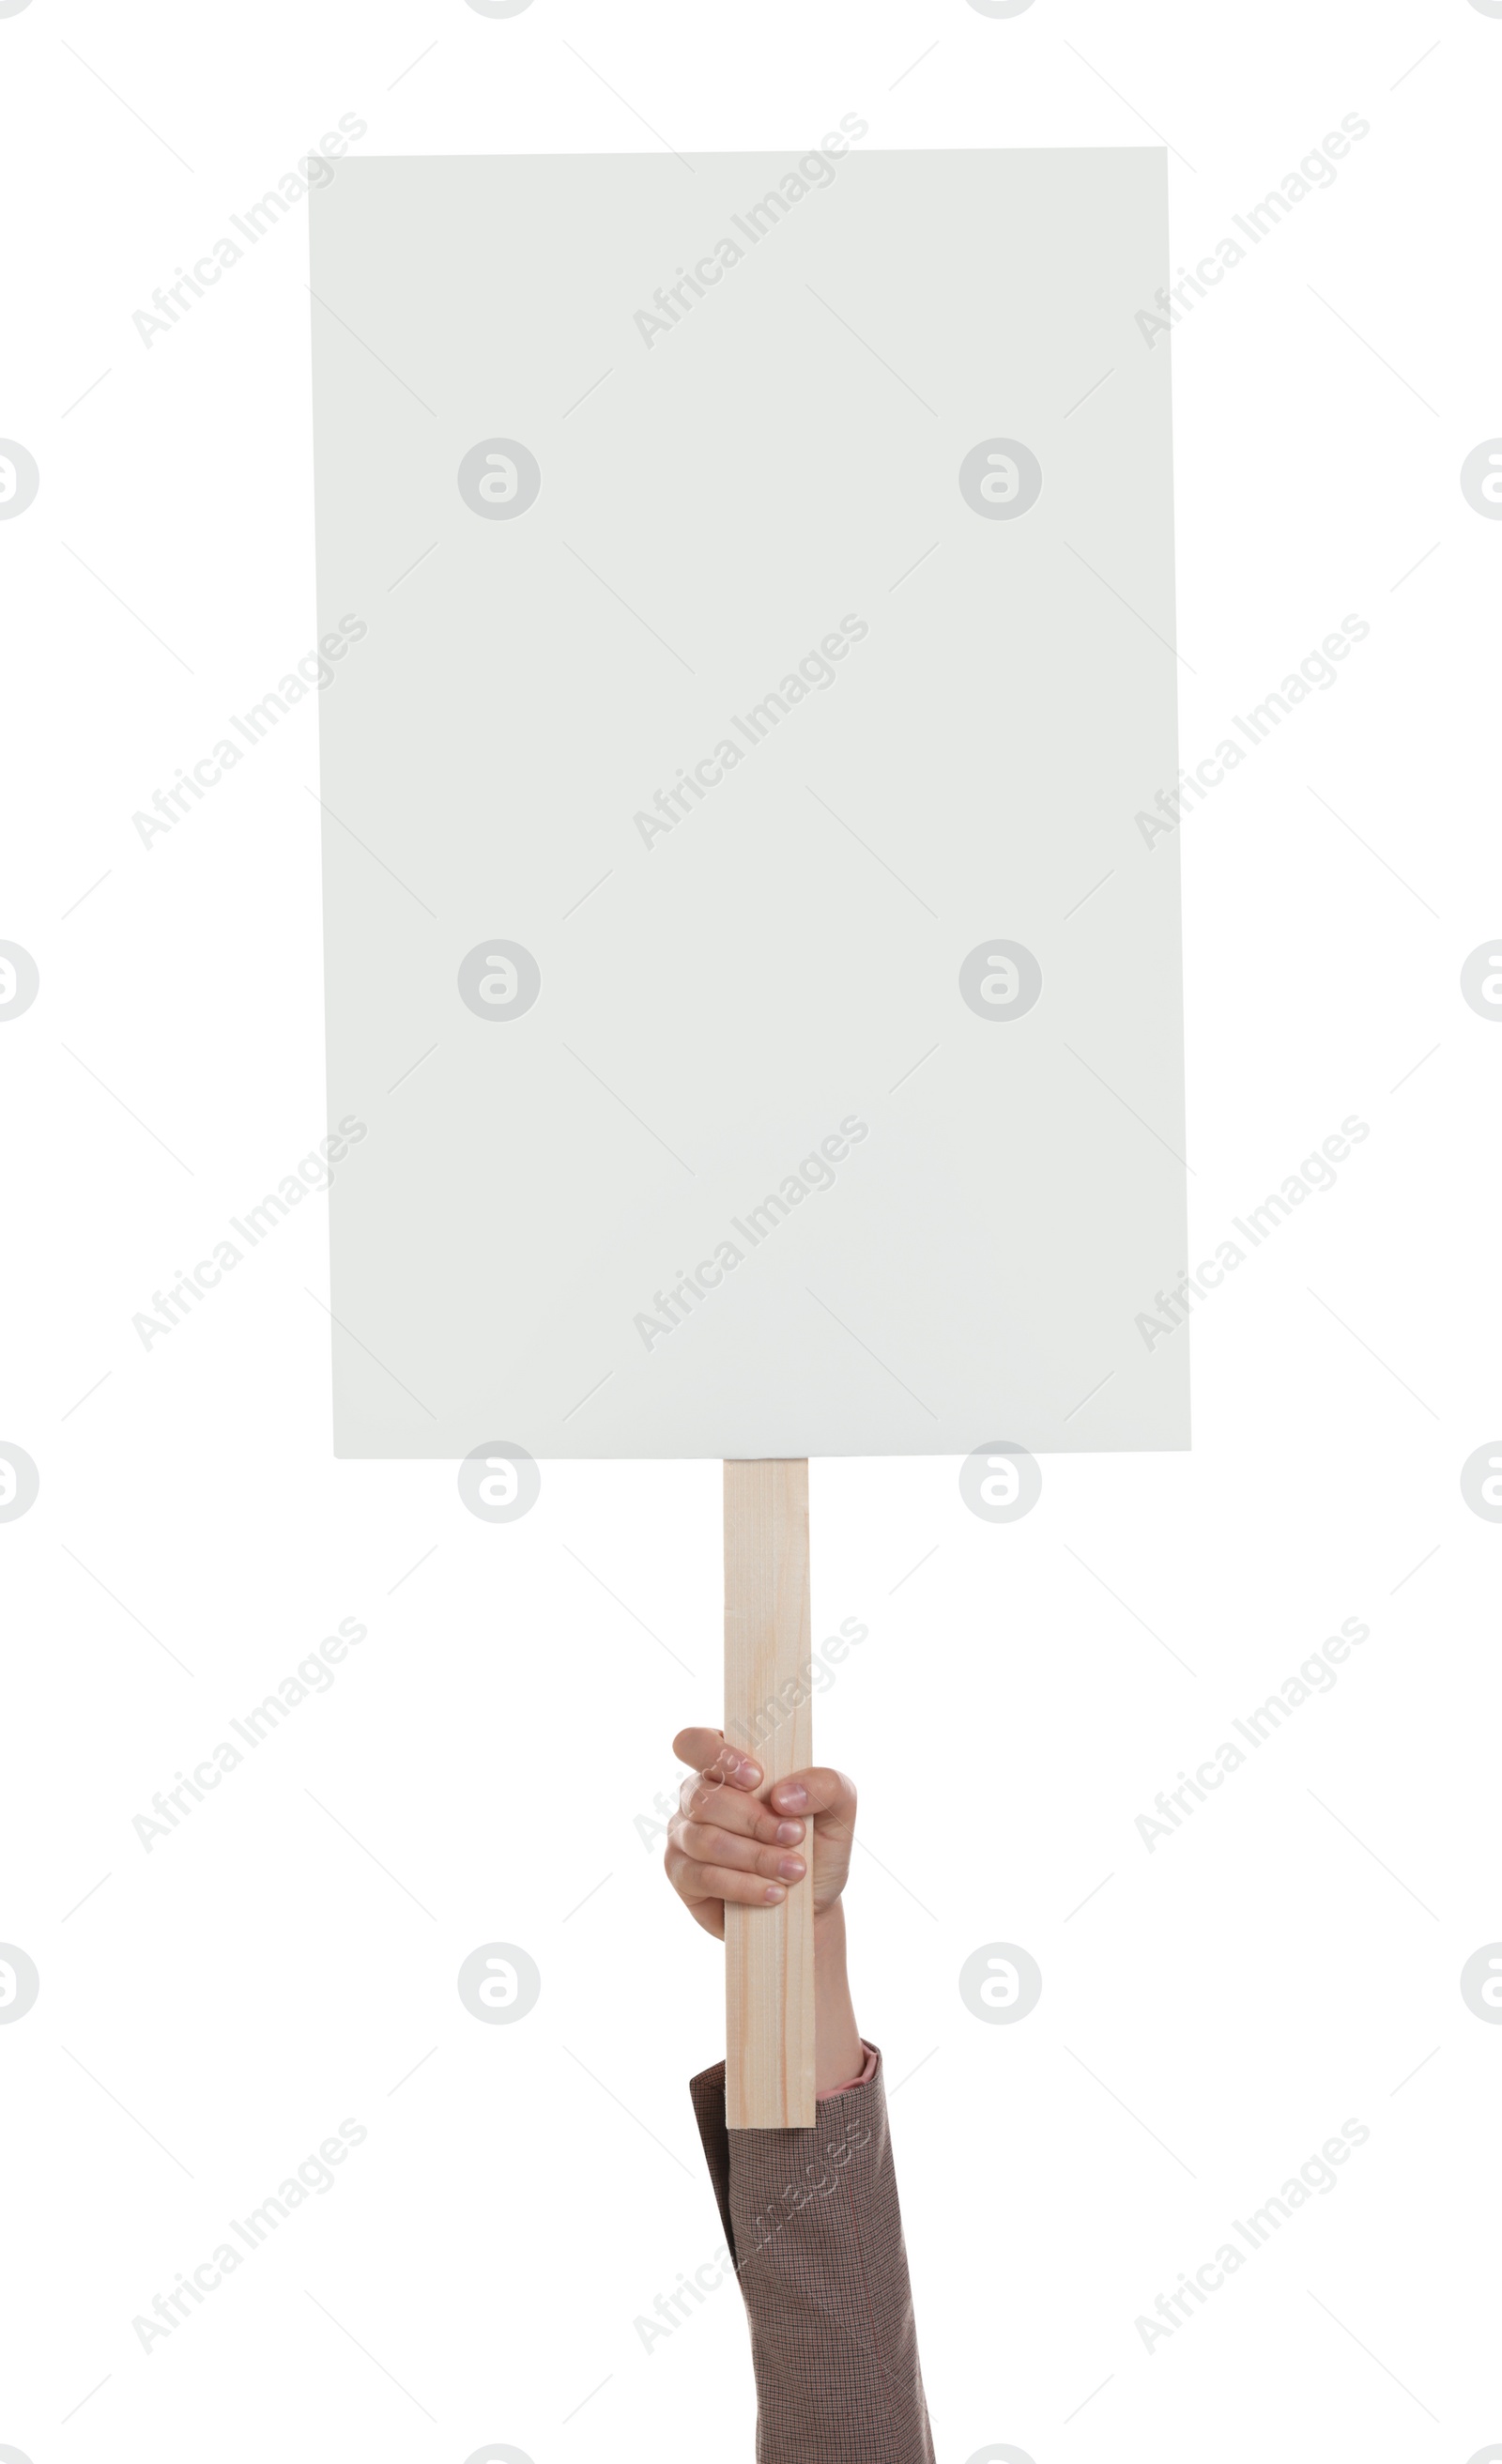 Photo of Woman holding blank protest sign on white background, closeup